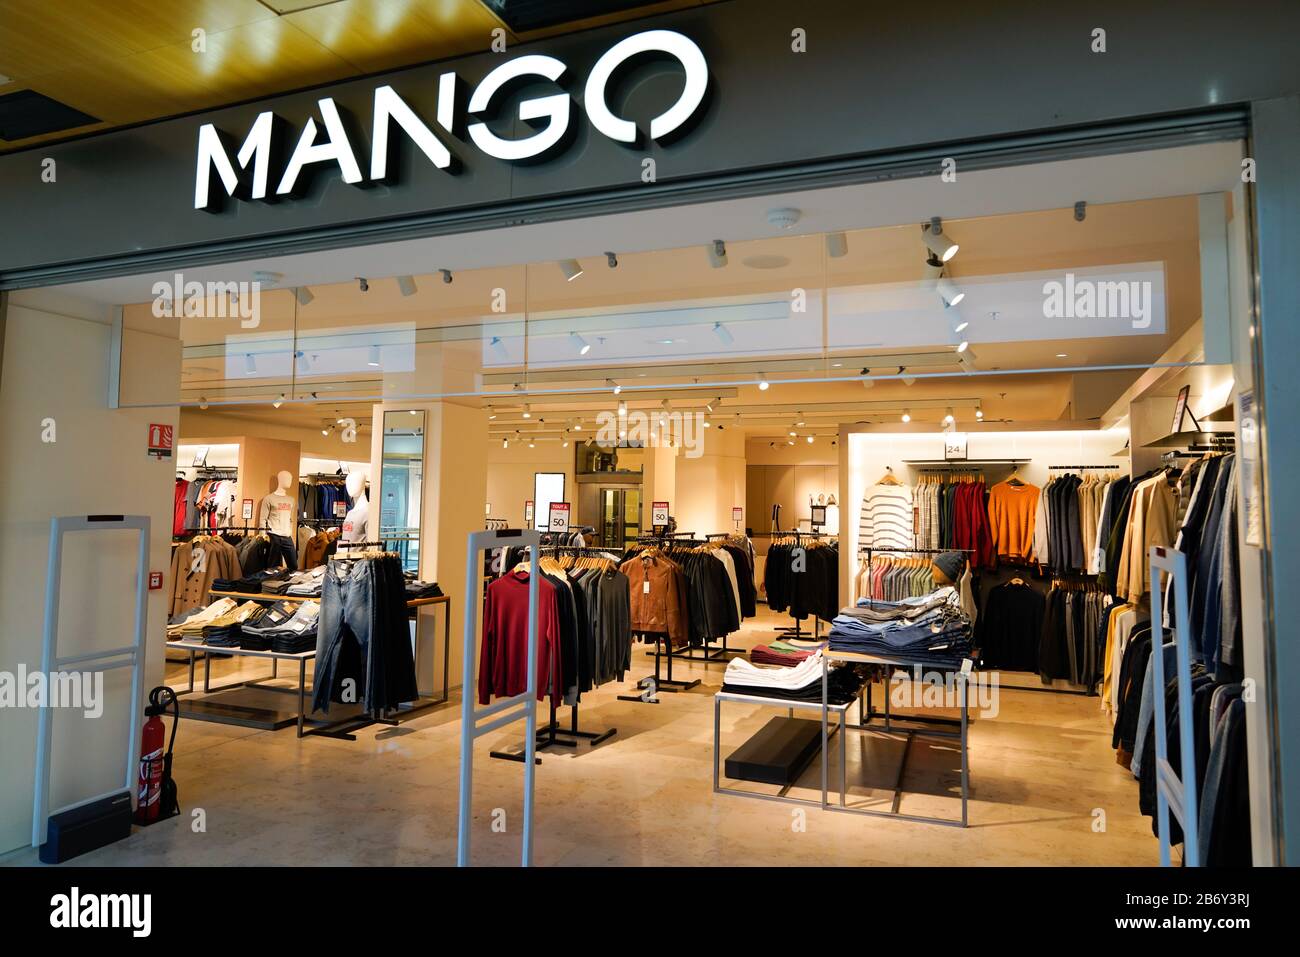 Mango Outlet High Resolution Stock Photography and Images - Alamy